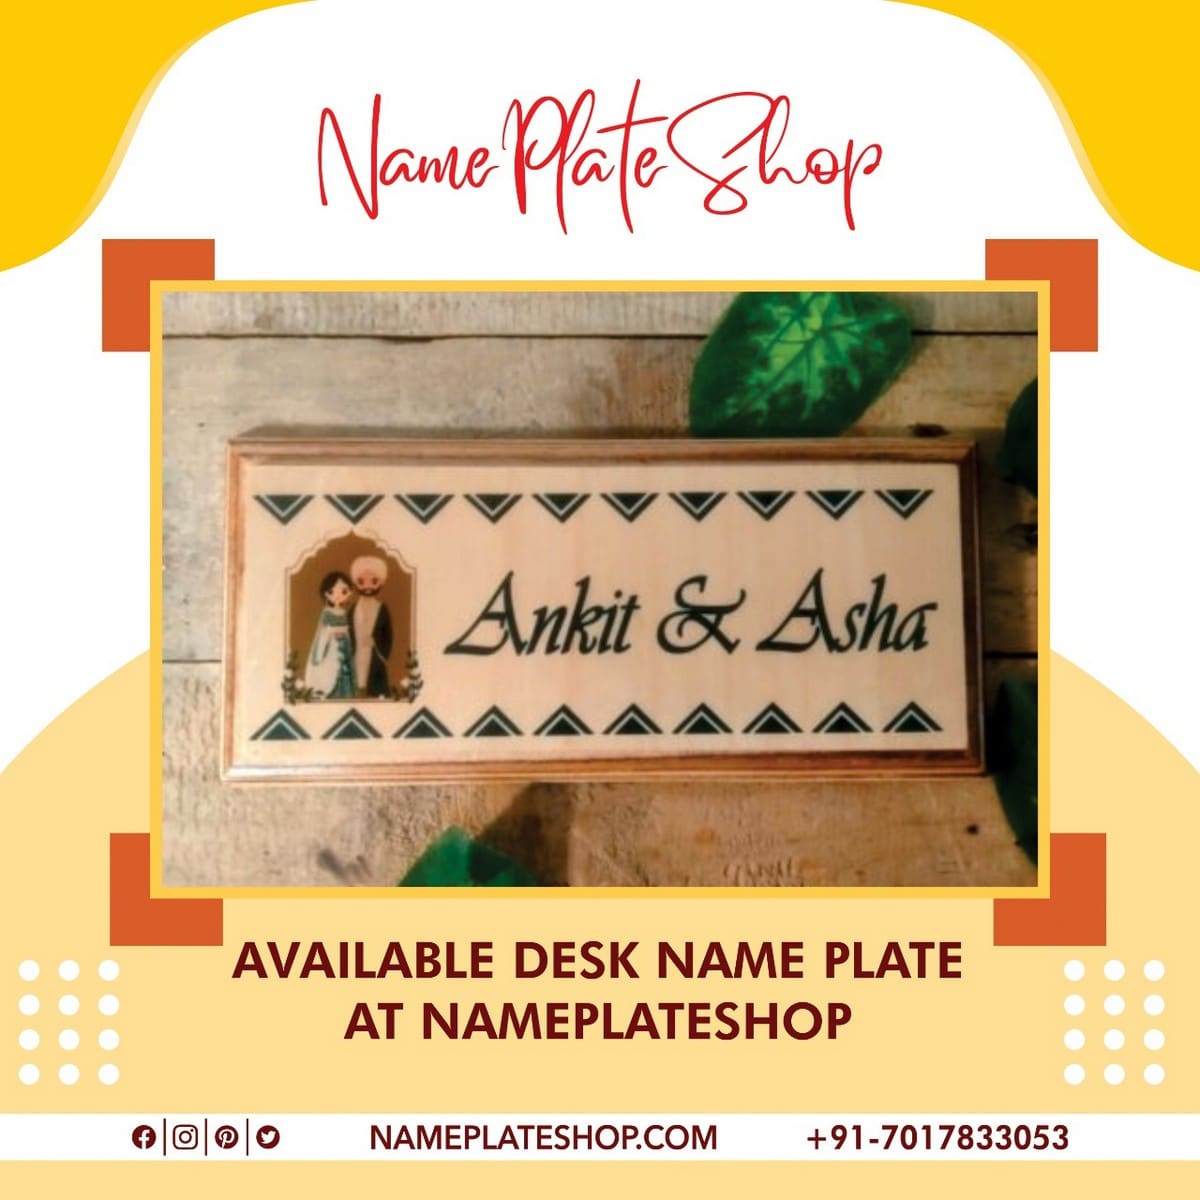 Available Desk Name Plate At Nameplateshop